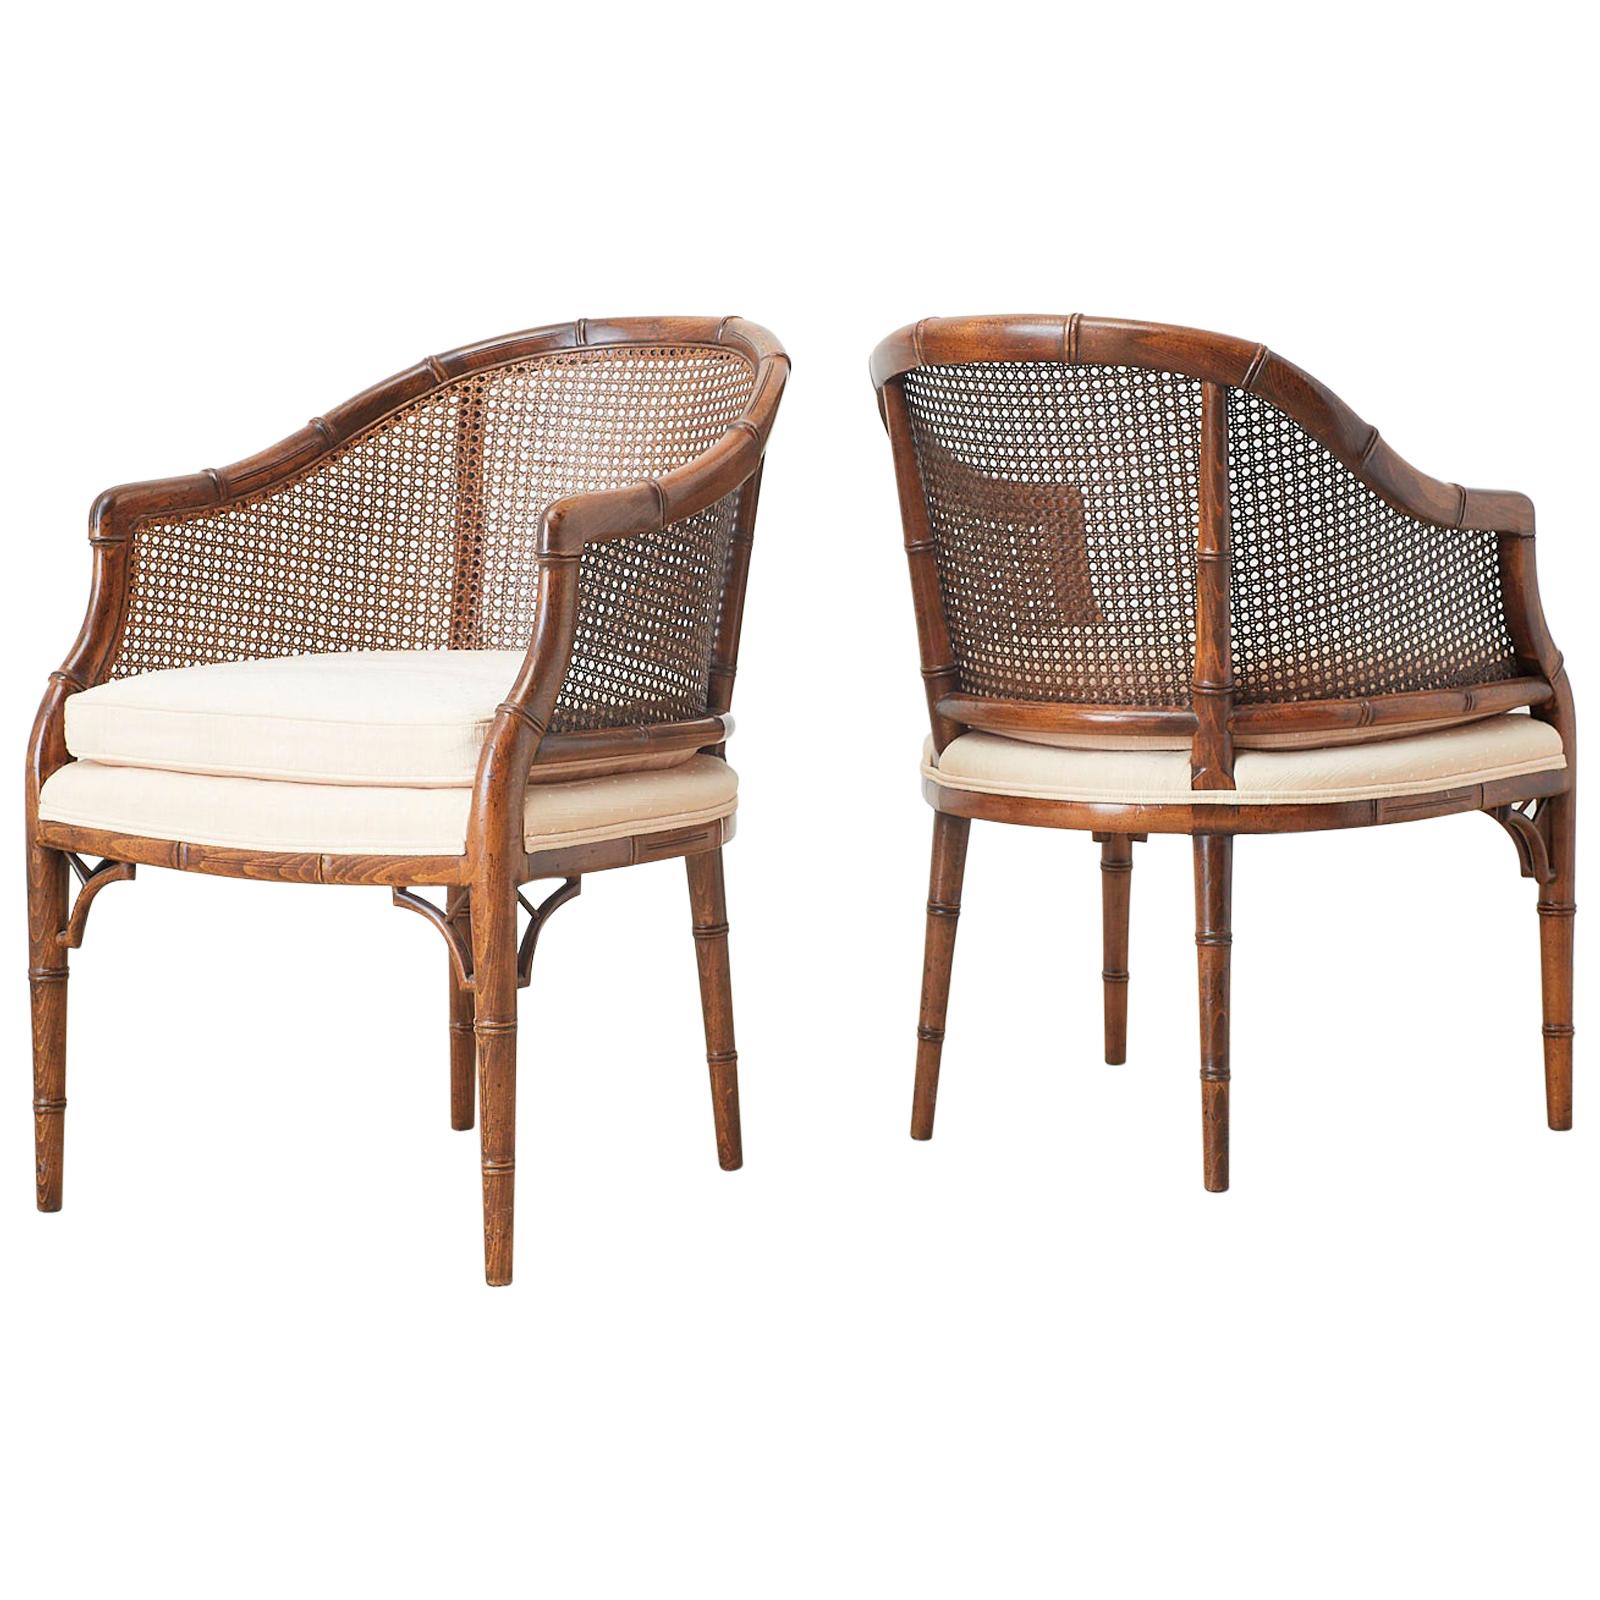 Pair of Midcentury Faux-Bamboo Caned Barrel Chairs